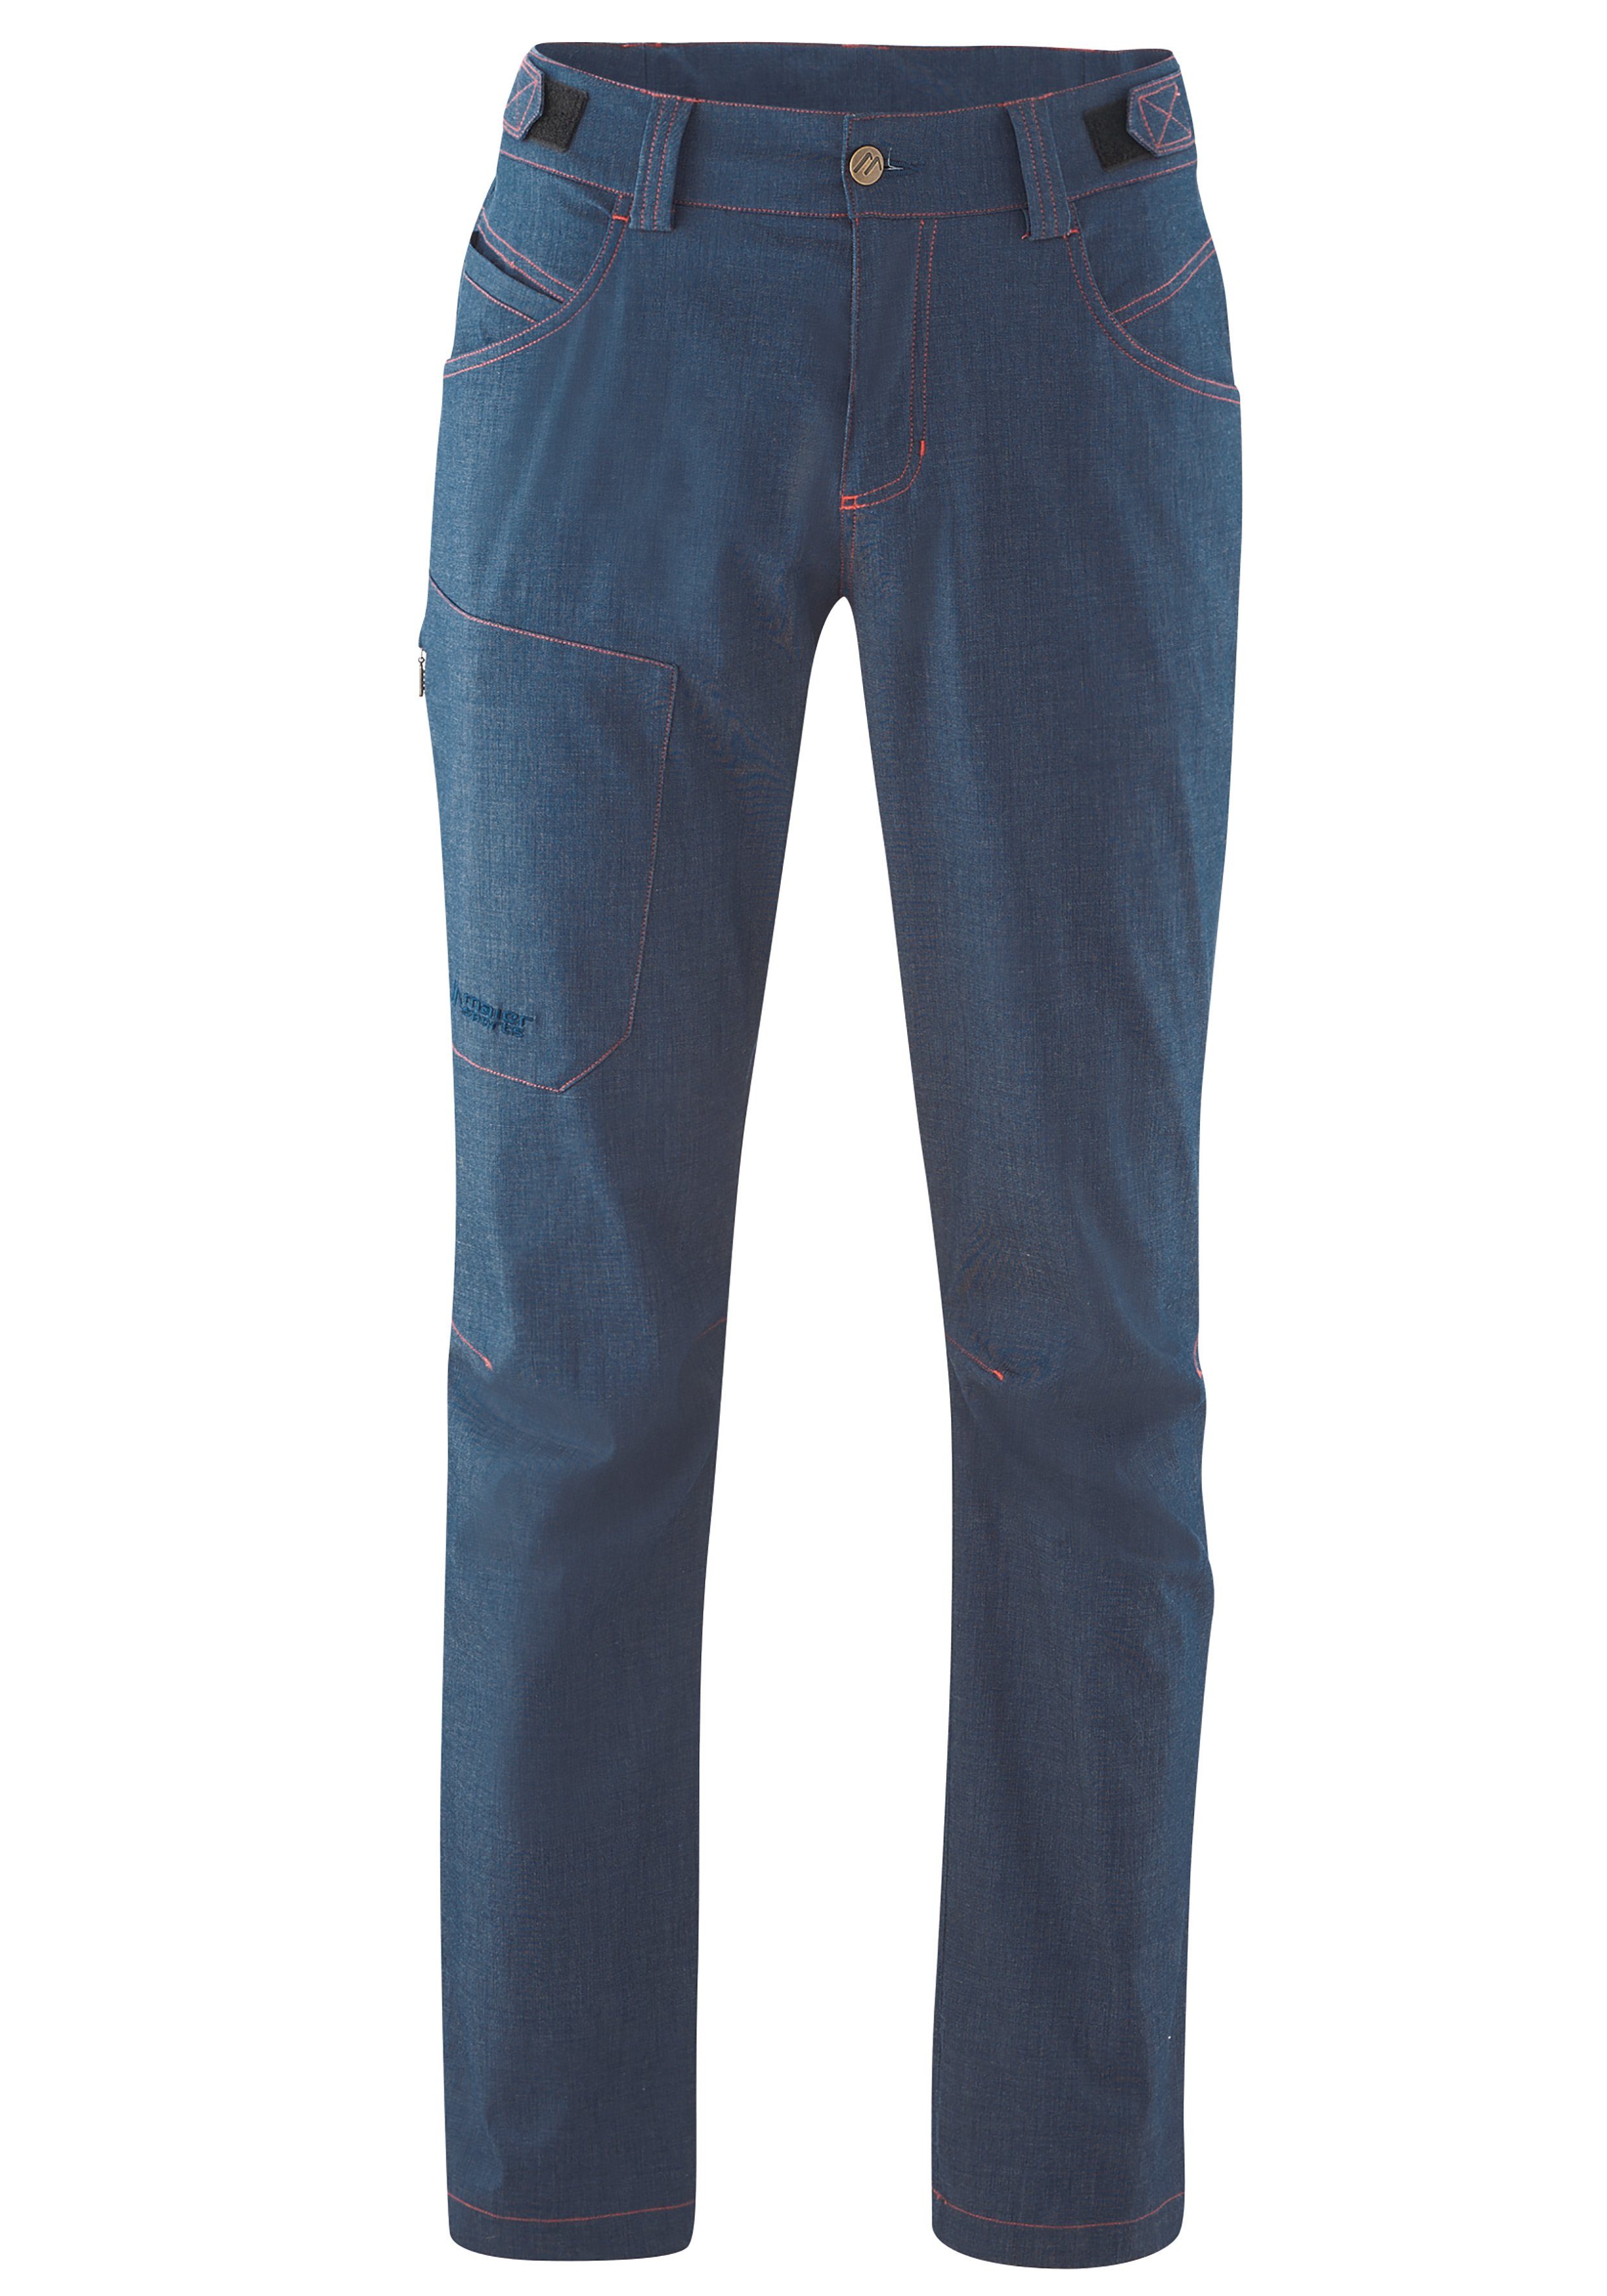 Coole Pyrit M Funktionshose Maier Jeans-Look im Sports 2.0 Outdoorhose